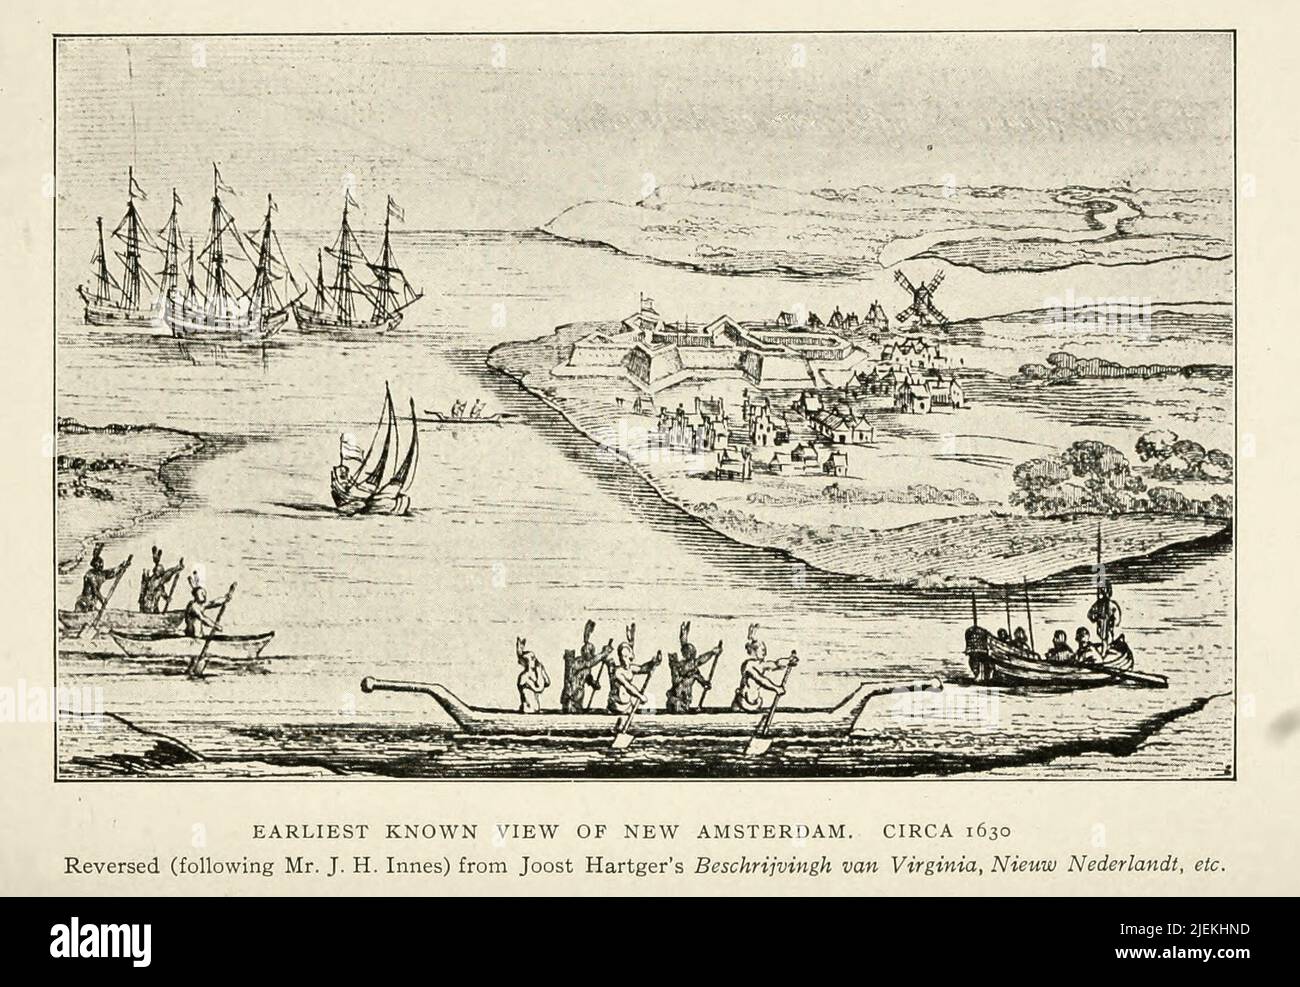 Earliest known view of New Amsterdam, circa 1630 Stock Photo